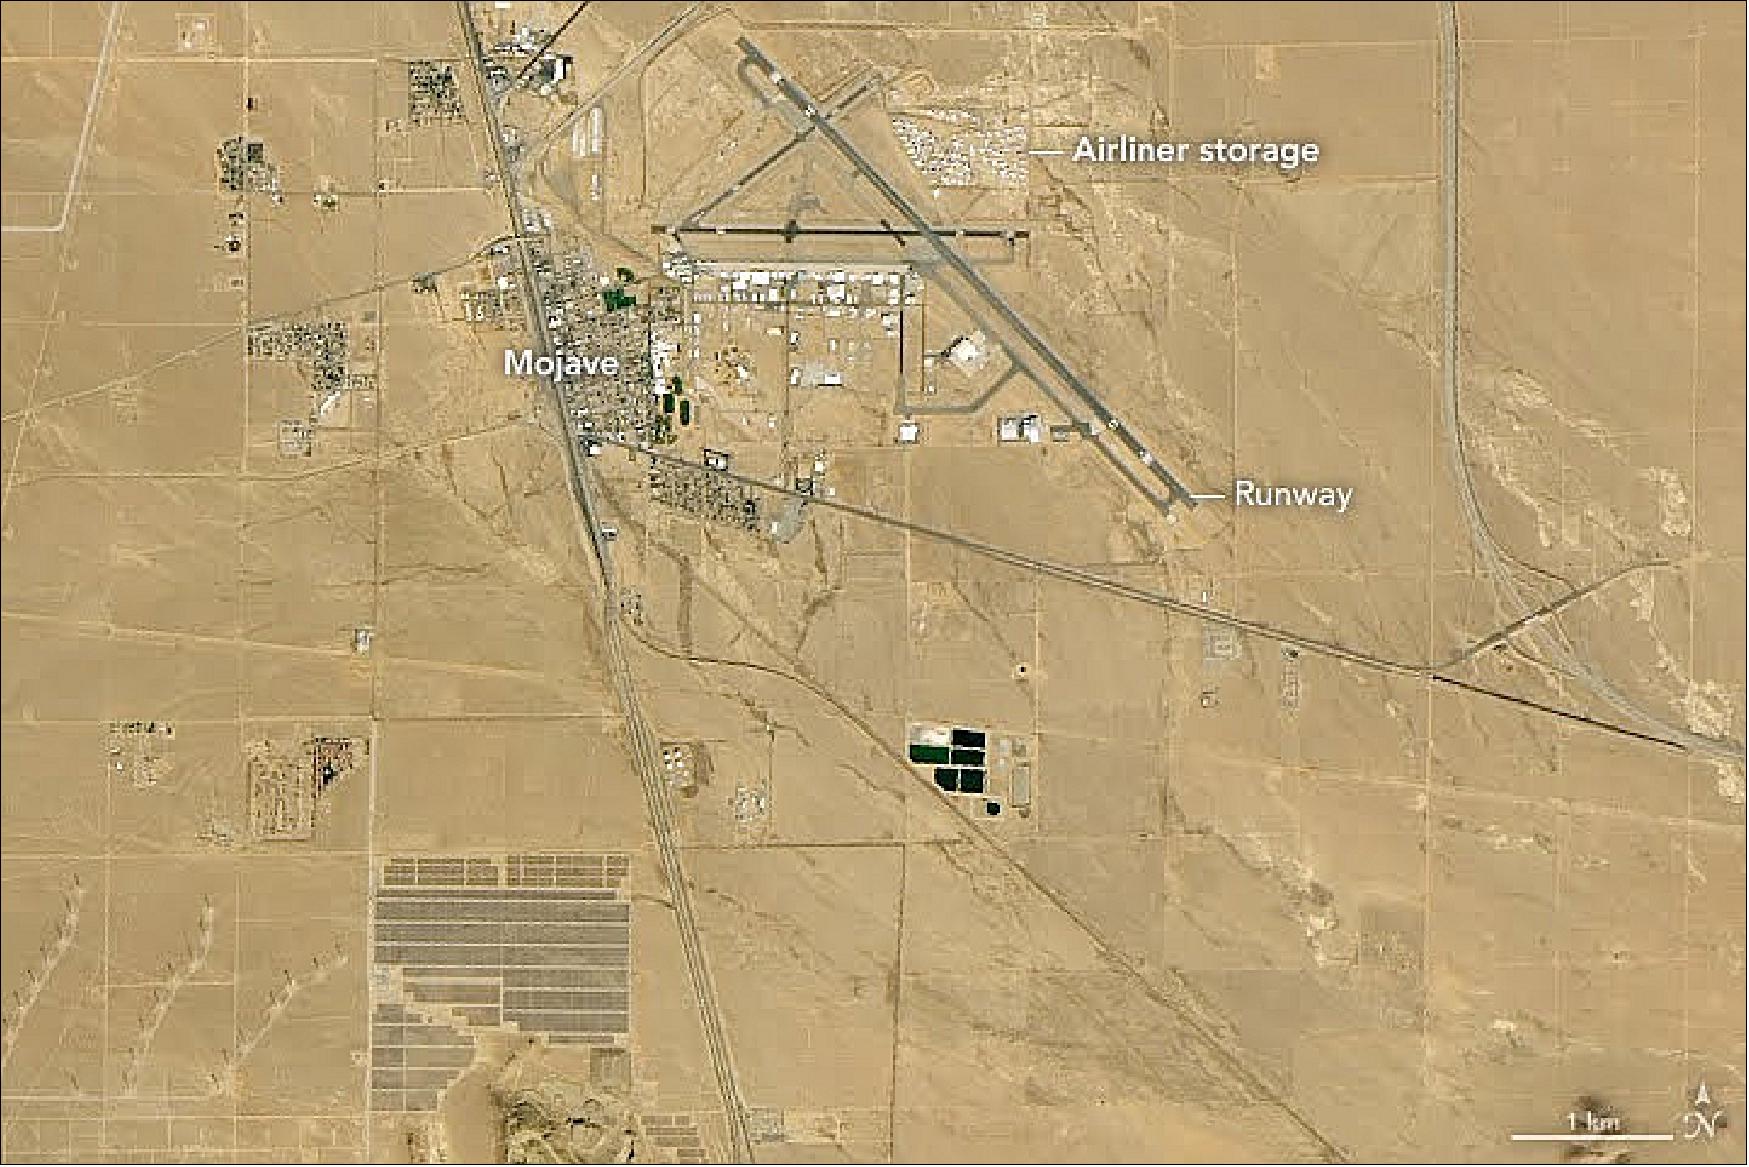 Figure 56: The Mojave Air and Space Port lies 25 km (15 miles) to the southwest. In 2004, federal authorities certified the facility as the first spaceport in the United States. Soon after, a private company launched a person into space on the rocket-powered aircraft SpaceShipOne. While experimental aircraft are a common sight, so are planes that are decades old. The air field also hosts a large storage area and boneyard for old planes (image credit: NASA Earth Observatory, image by Lauren Dauphin, using Landsat data, observed on 18 October 2018, from the U.S. Geological Survey. Story by Adam Voiland)